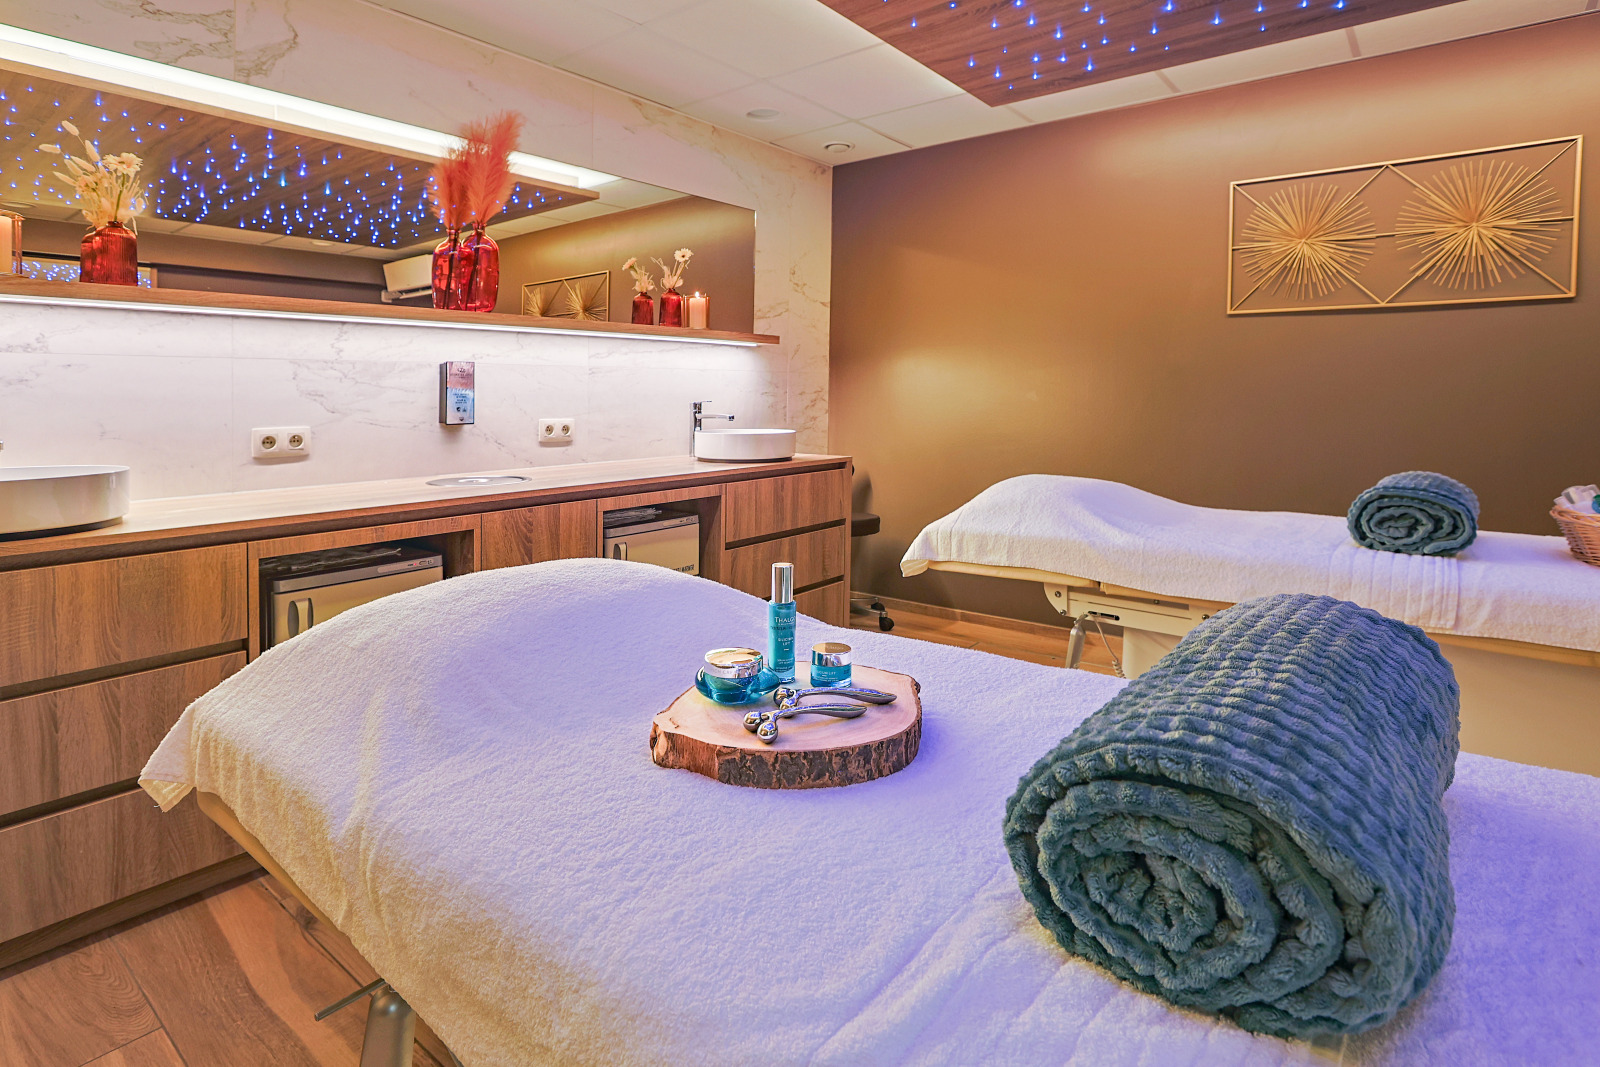 Interior of the cabin for duo treatments